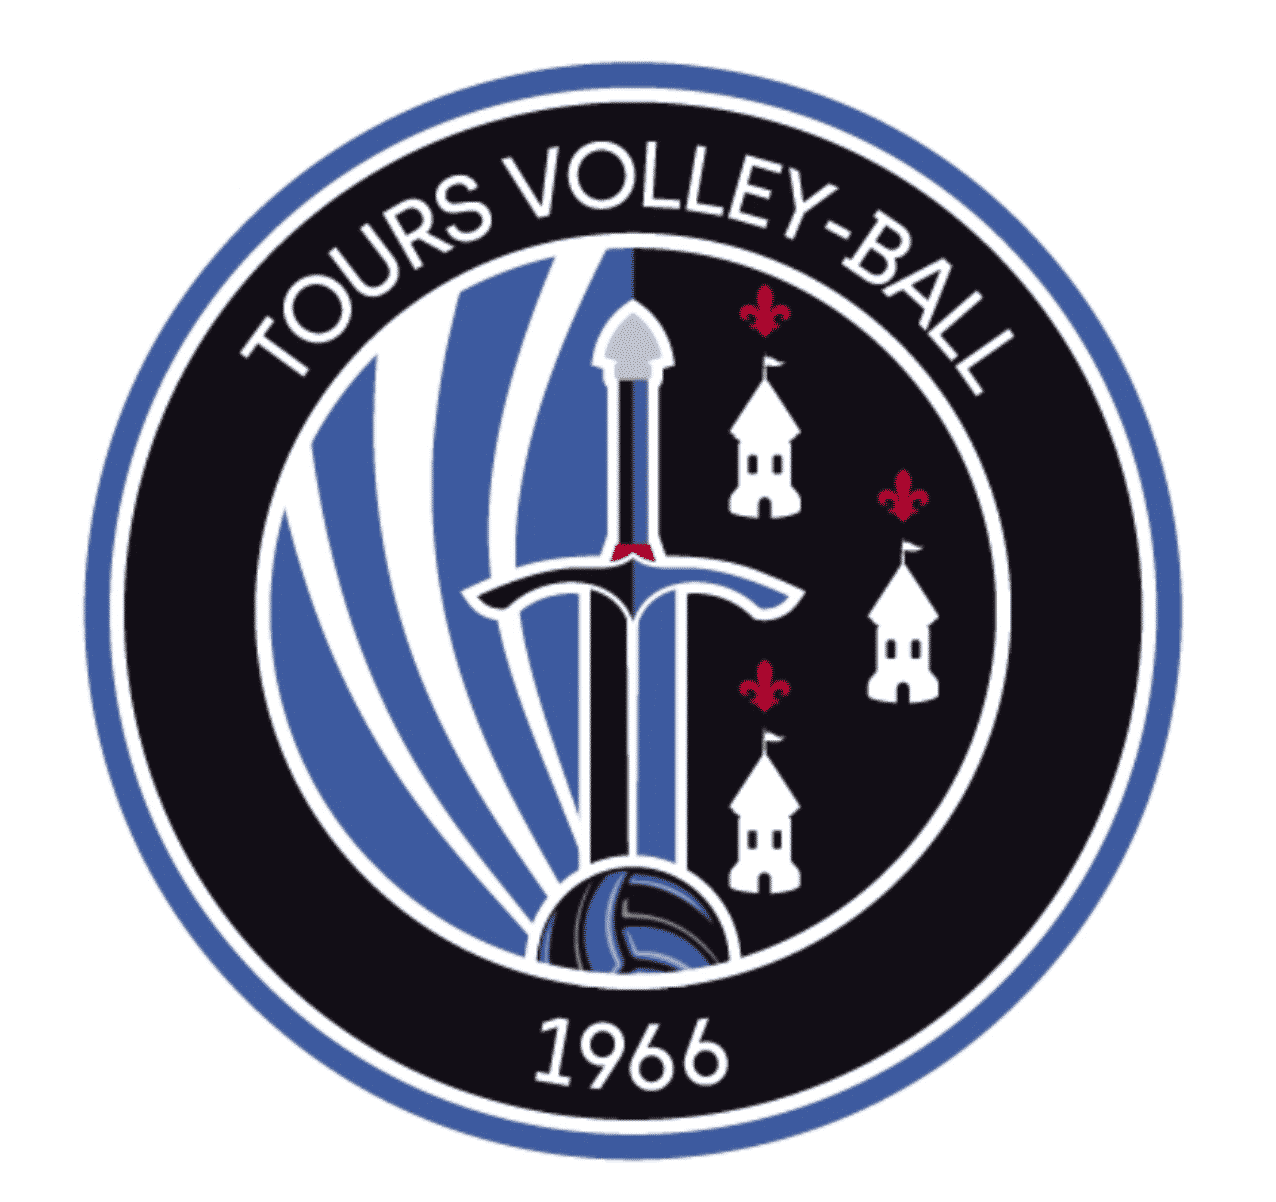 tours volley ball equipe